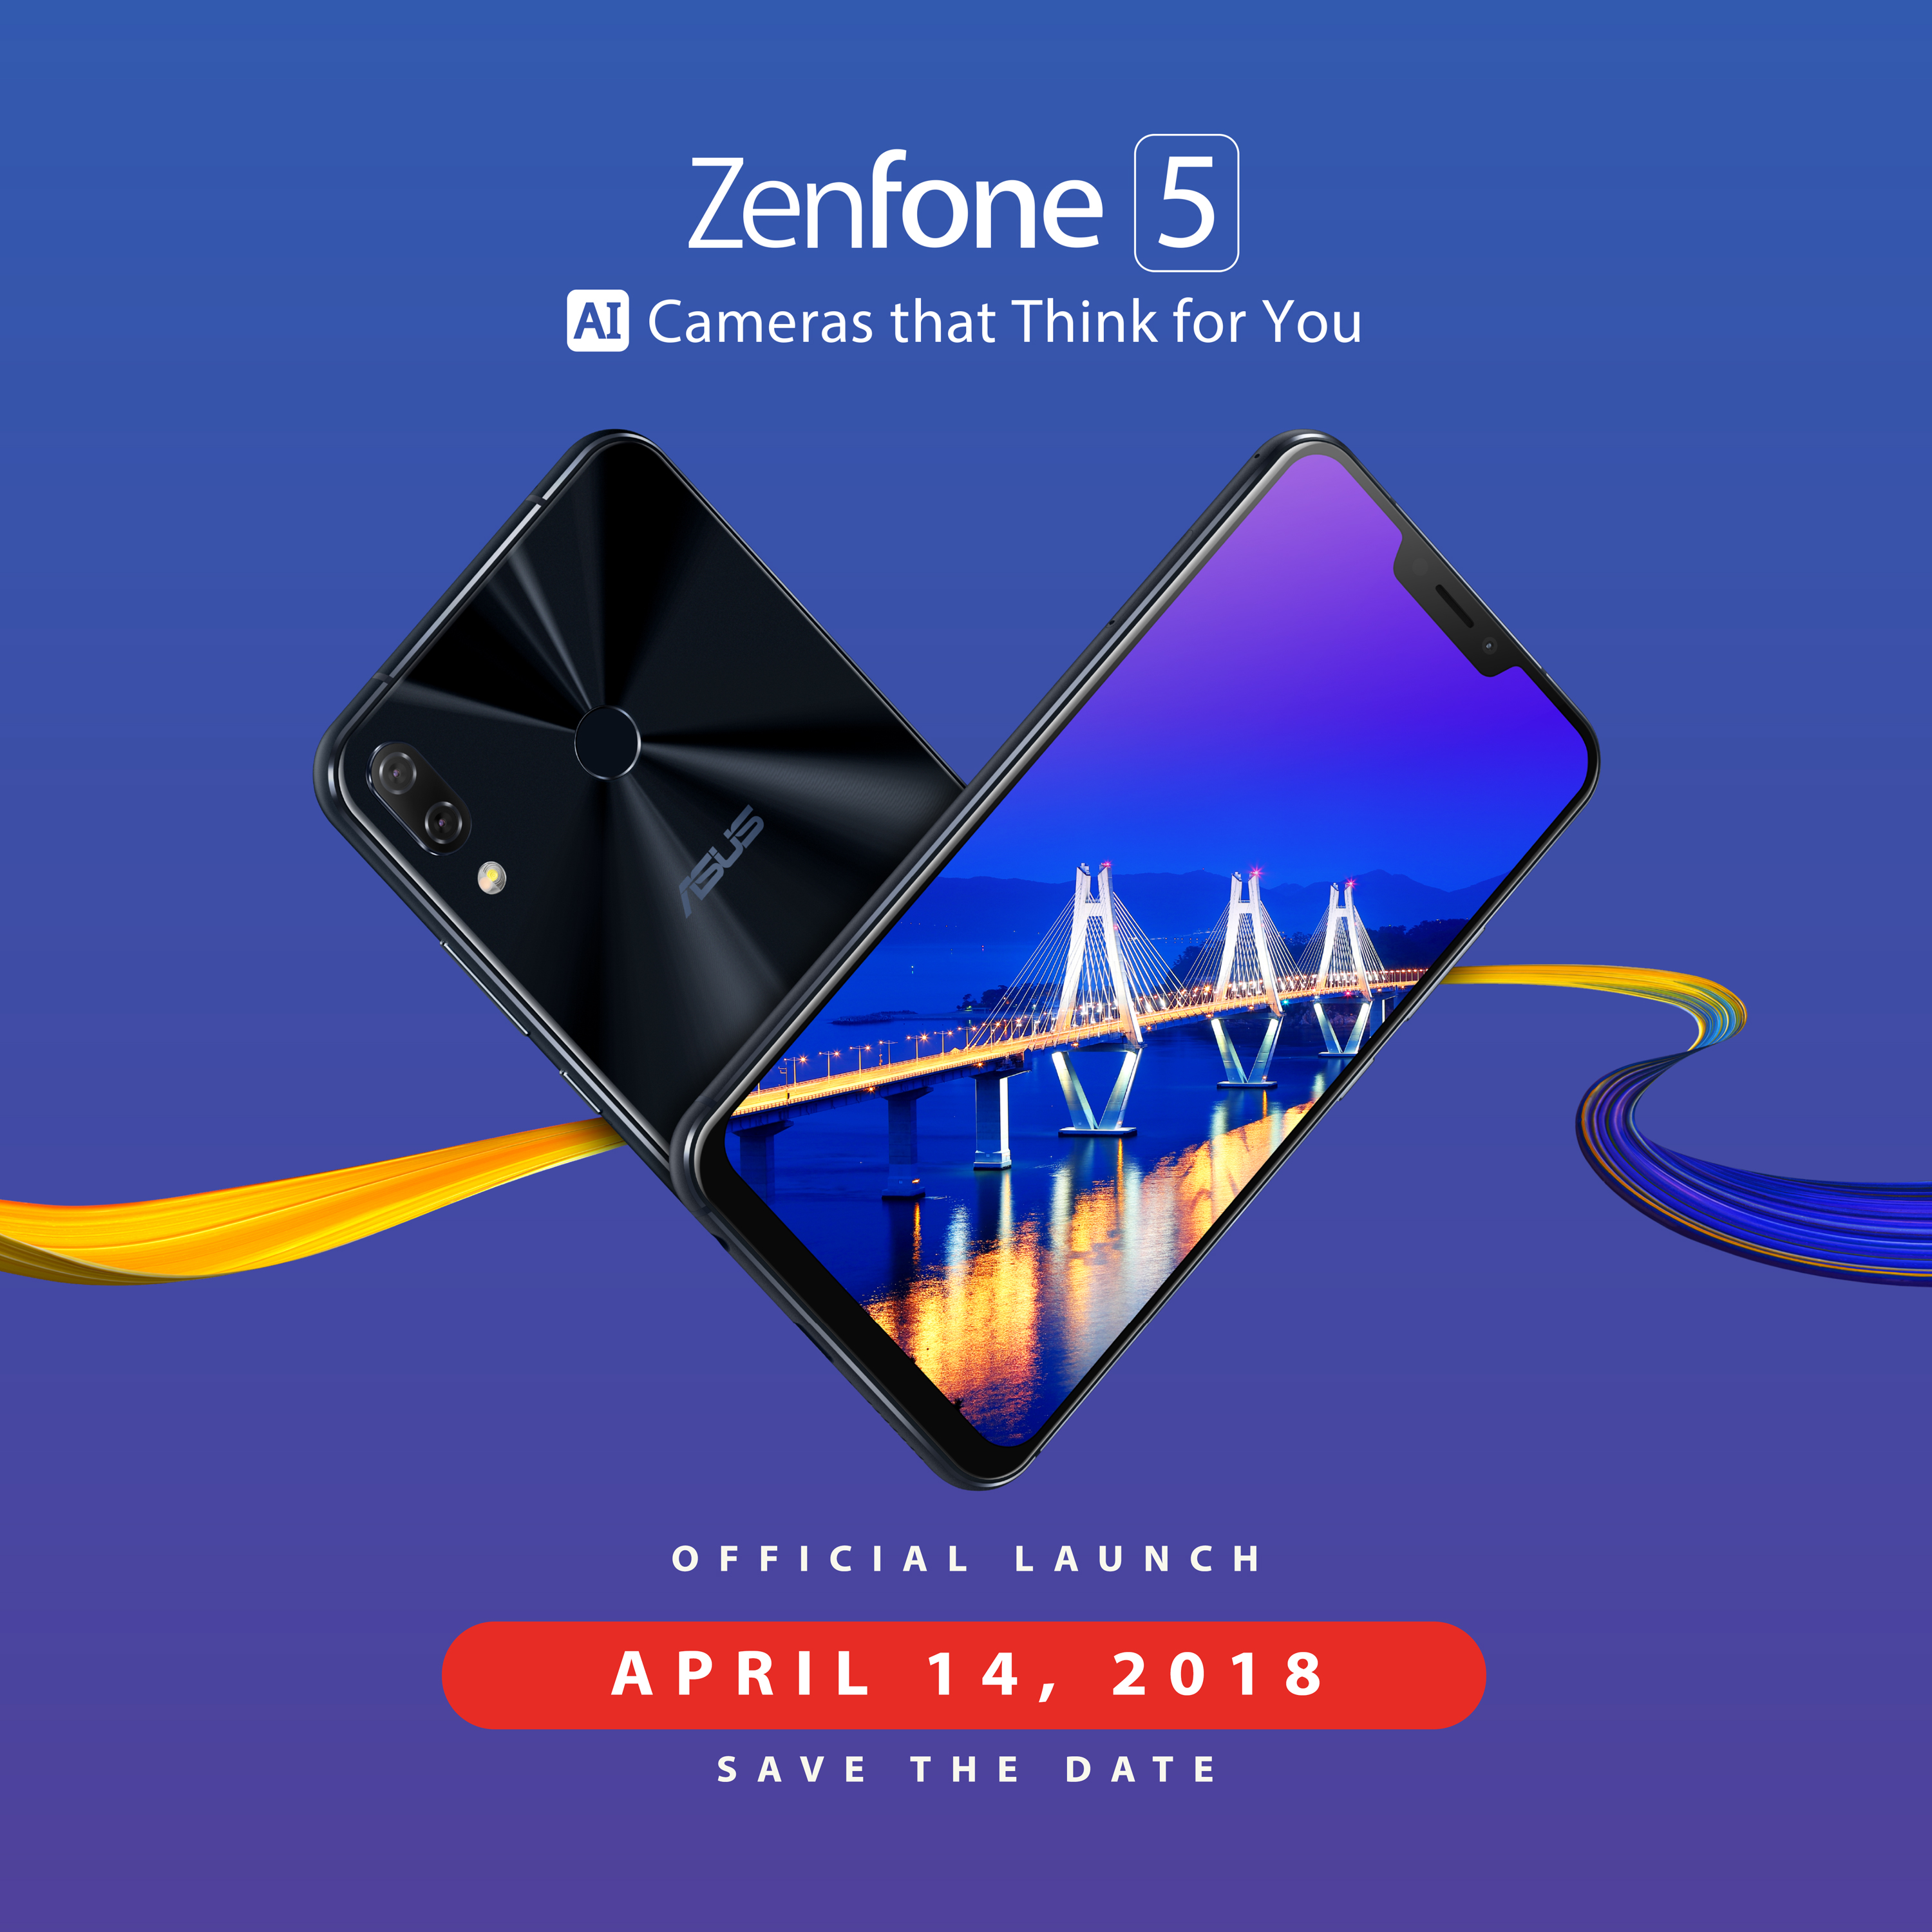 ASUS Announce the Arrival of The ASUS Zenfone 5